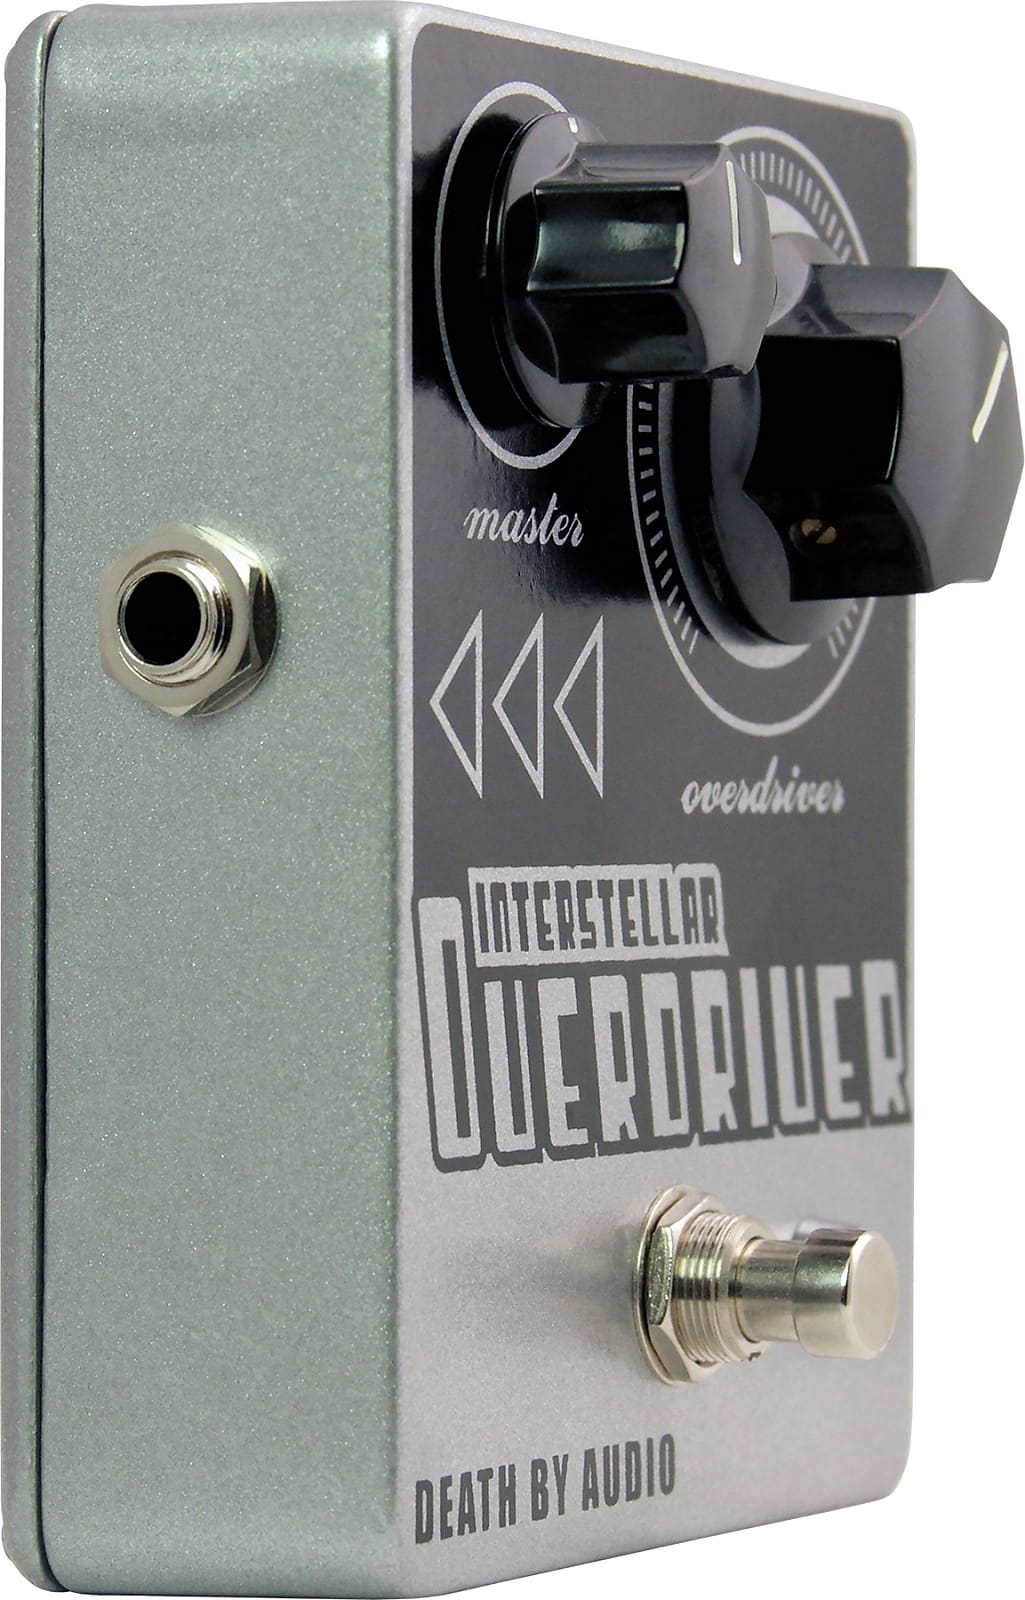 Death By Audio DBA Interstellar Overdriver Overdrive Effects Pedal